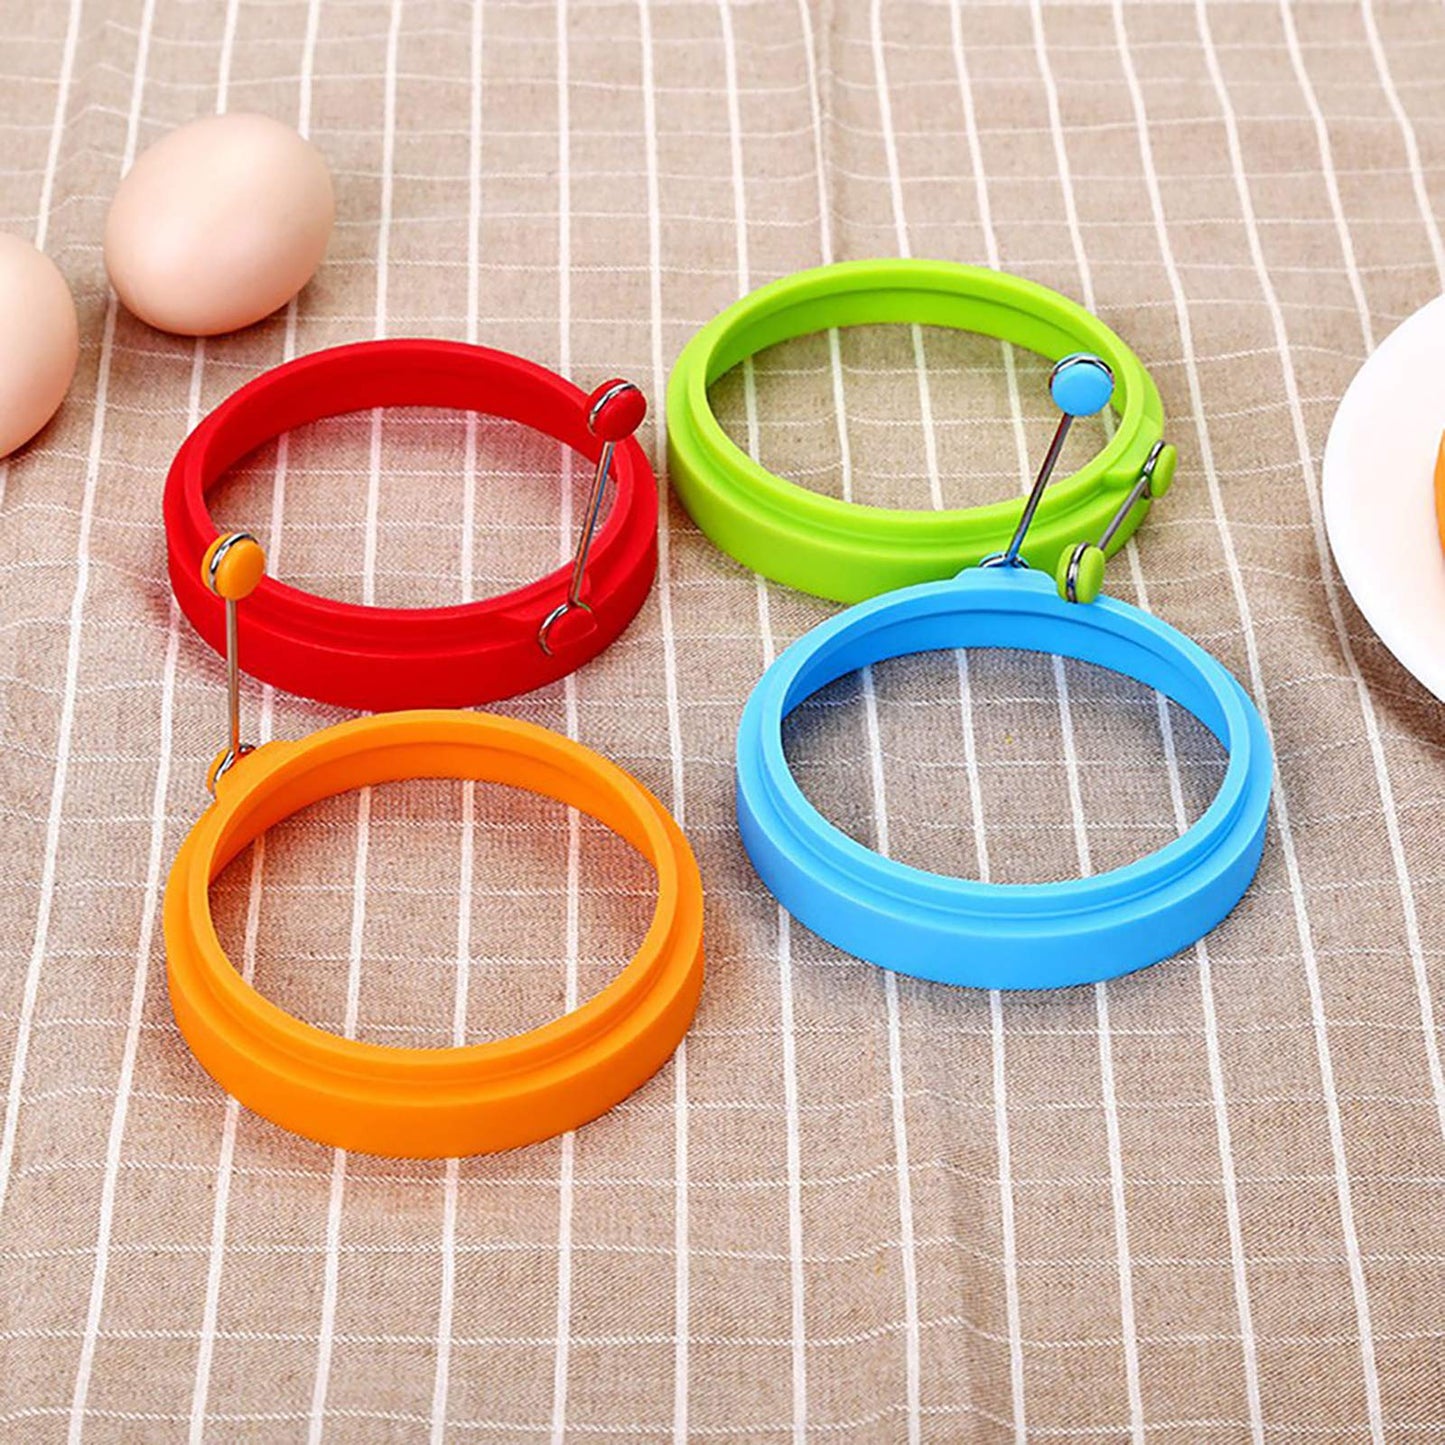 Food Grade Silicone Egg Rings, Multicolor, Egg Ring Molds for Cooking, Fried Egg Rings(4 Pack, 4 Inches)